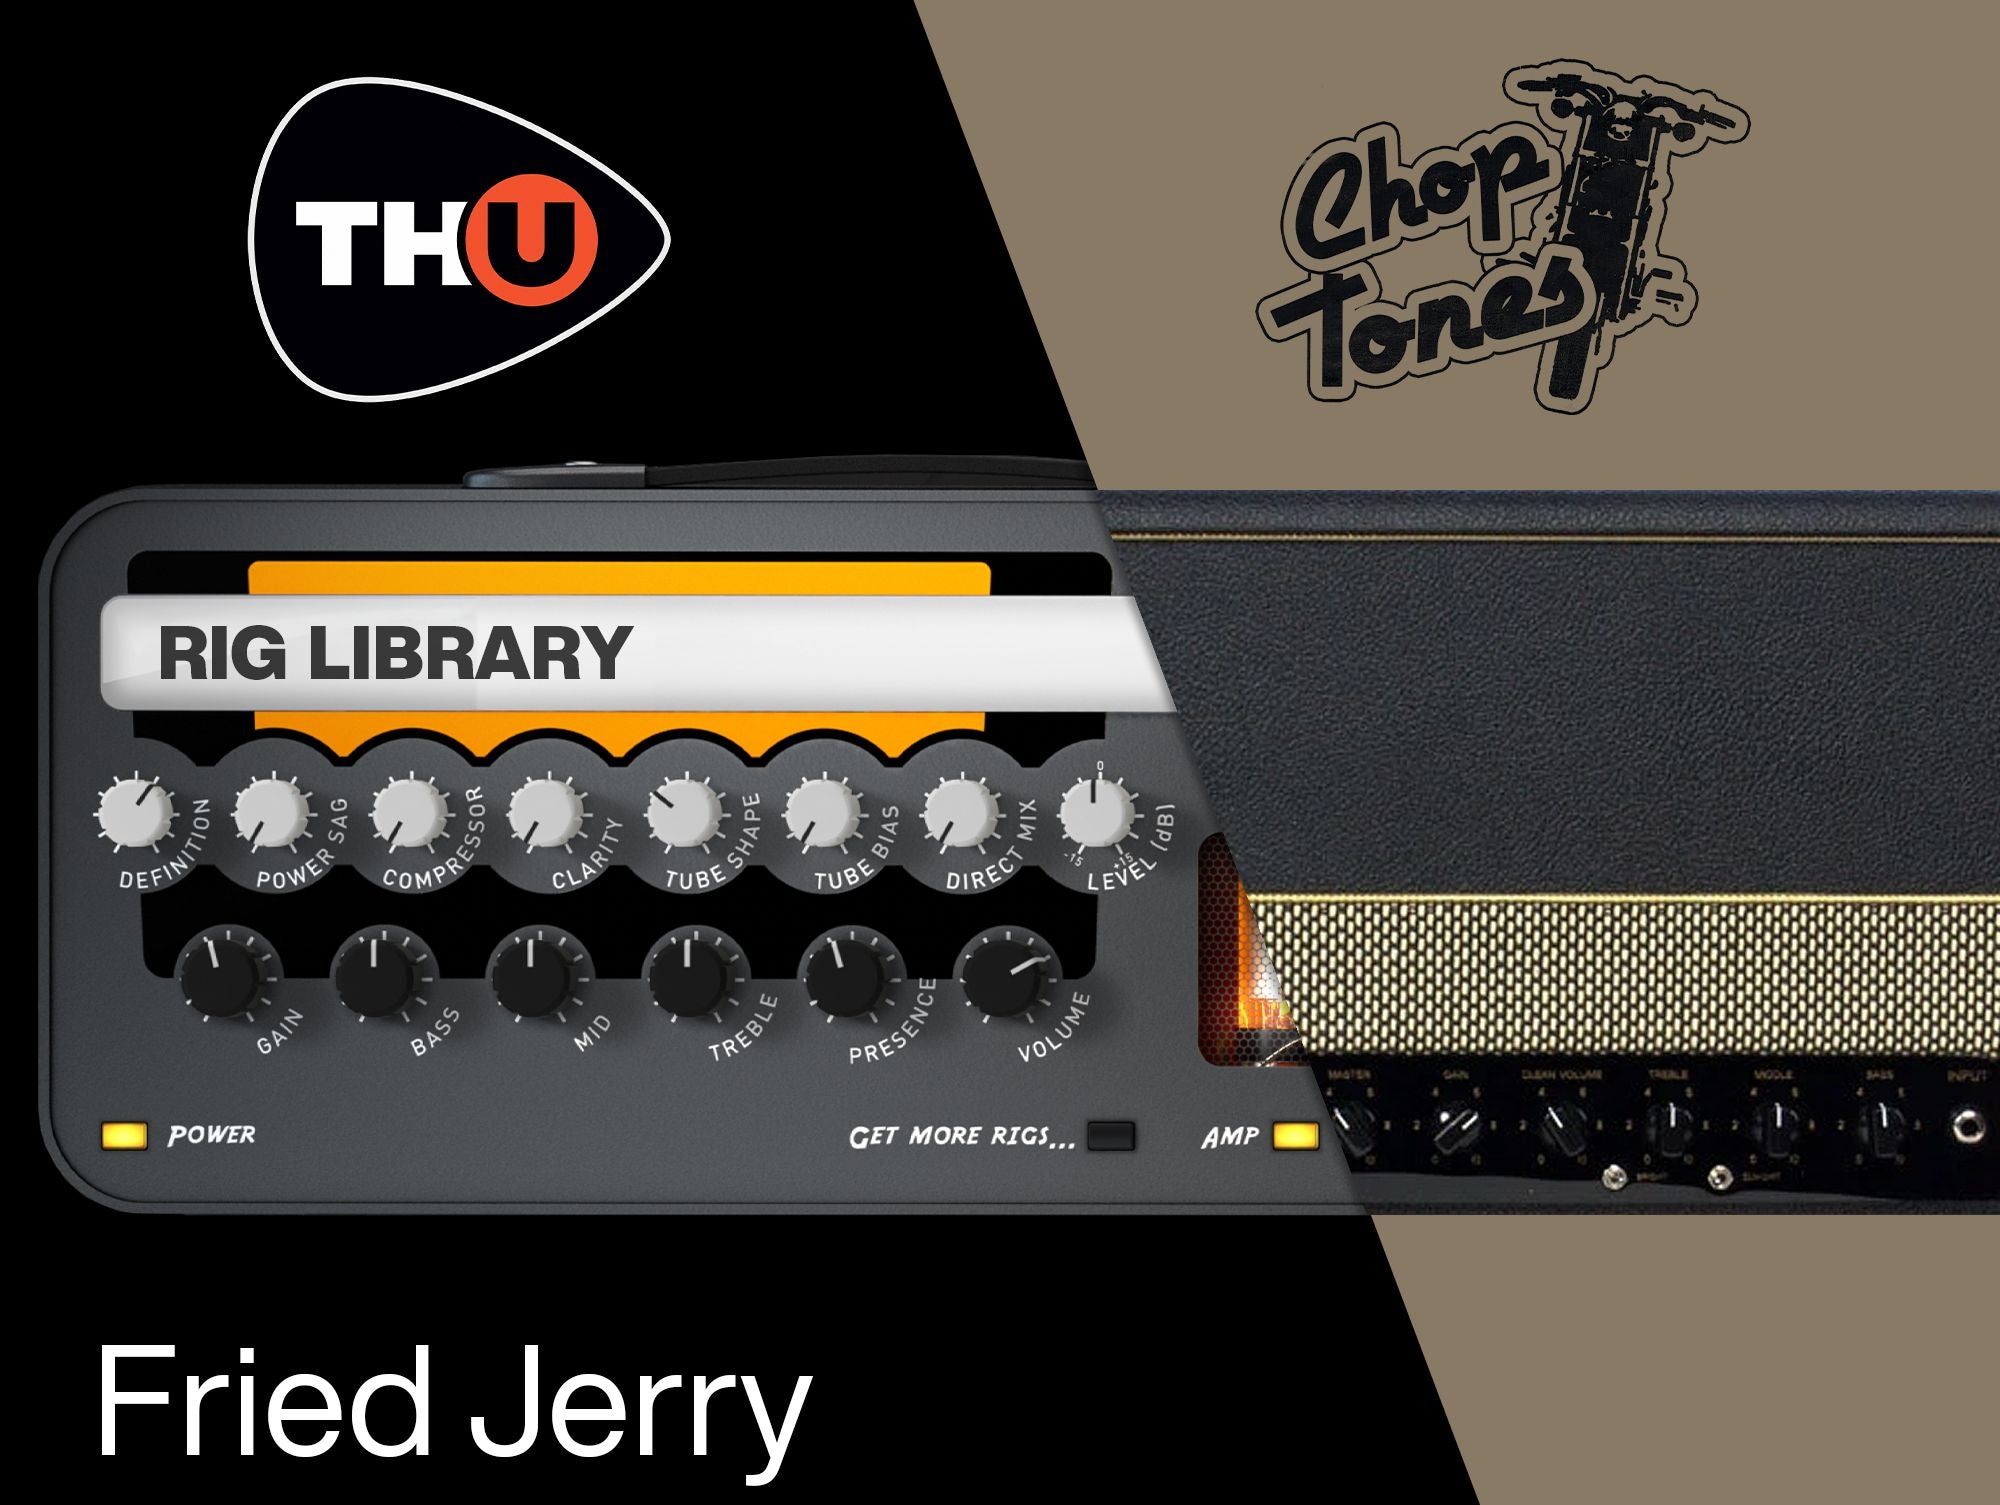 Overloud Choptones Fried Jerry - TH-U Rig Library